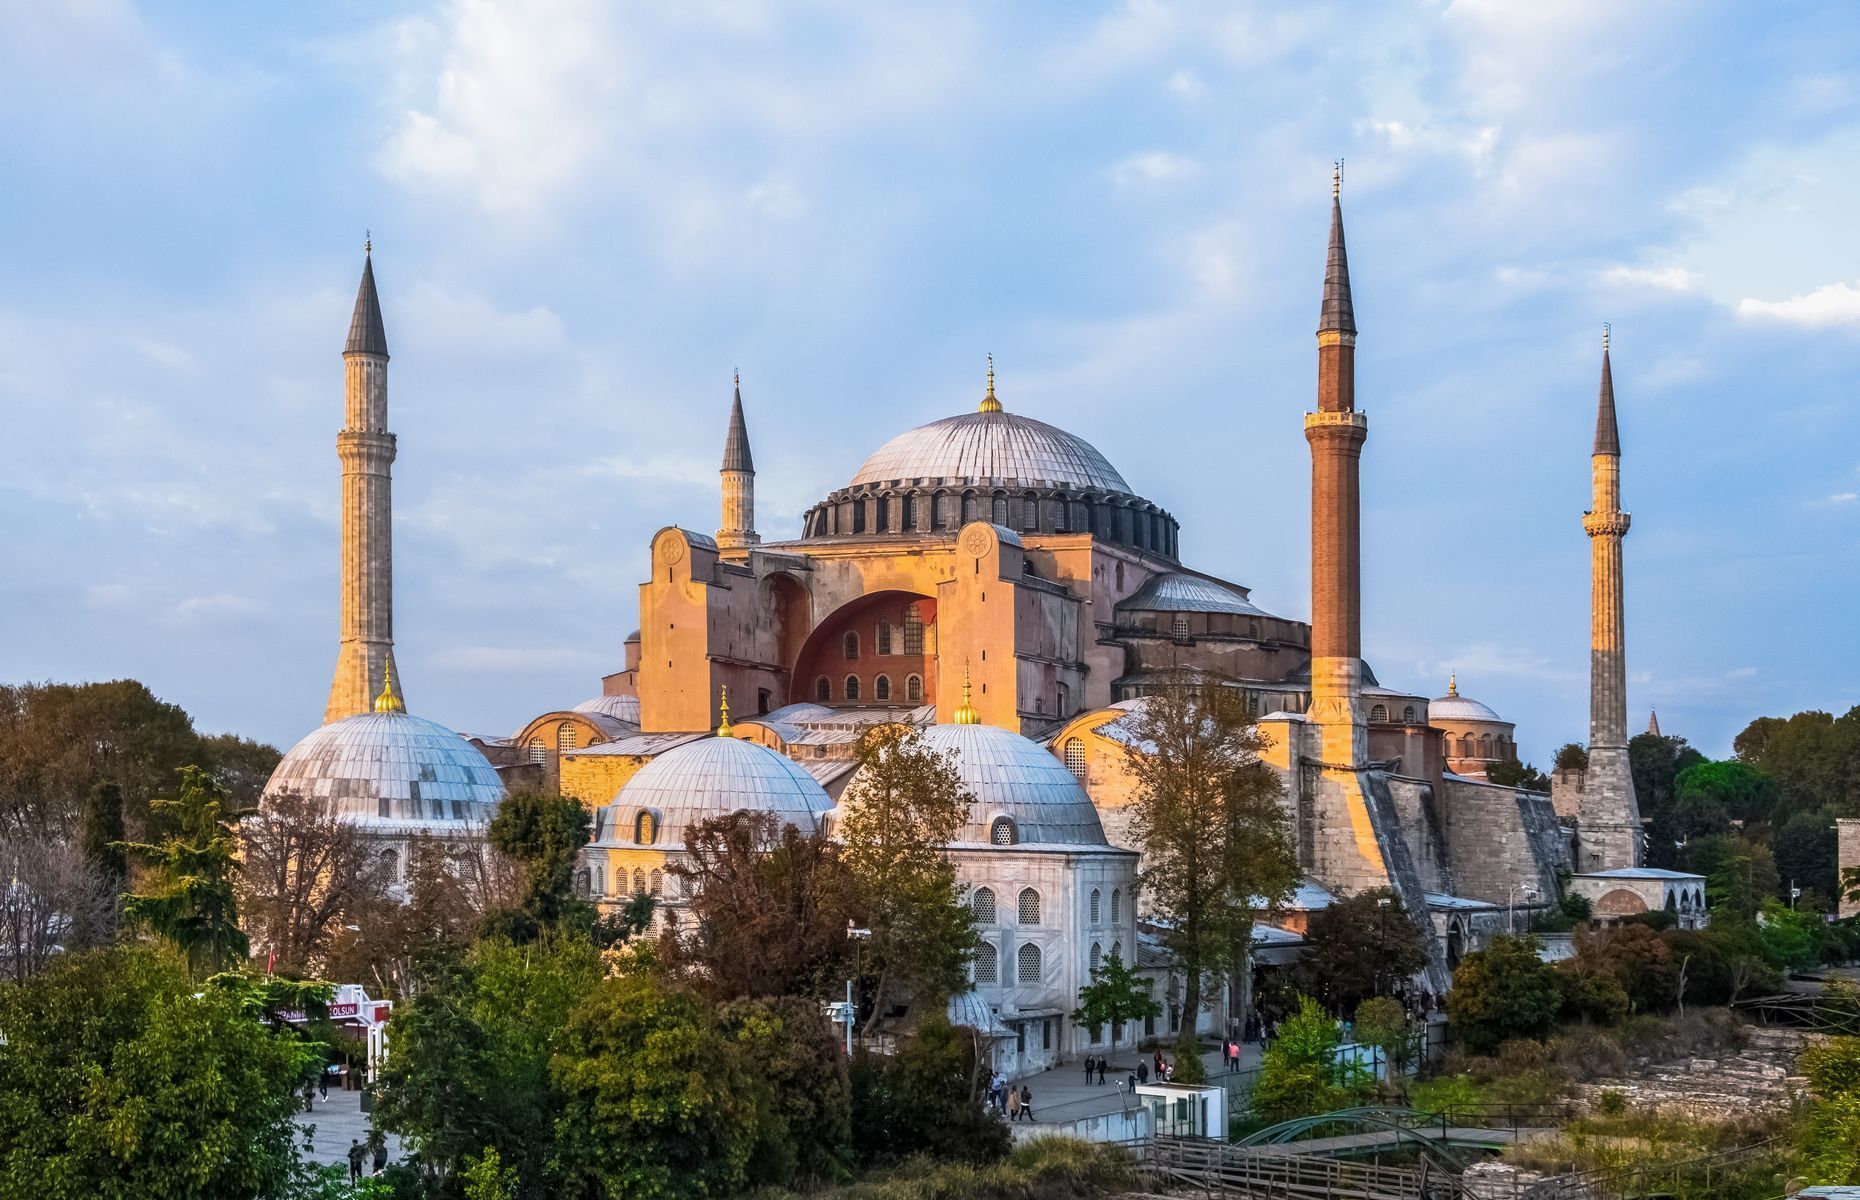 <p>Hagia Sophia has an eventful religious history, alternately serving as a church, mosque, and museum <a href="https://www.bbc.com/news/world-europe-53366307" rel="noreferrer noopener">before reconverting to a Muslim place of worship in 2020</a>. Built in the 6th century, it constitutes a major <a href="https://www.livescience.com/27574-hagia-sophia.html" rel="noreferrer noopener">work of Byzantine architecture</a>. Elements of Ottoman Islamic decor were added after Constantinople was captured in the 15th century. The Hagia Sophia is one of the main attractions of the Turkish metropolis and welcomed <a href="https://www.statista.com/statistics/921307/most-visited-museums-in-istanbul/" rel="noreferrer noopener">3.8 million visitors in 2019</a>.</p>